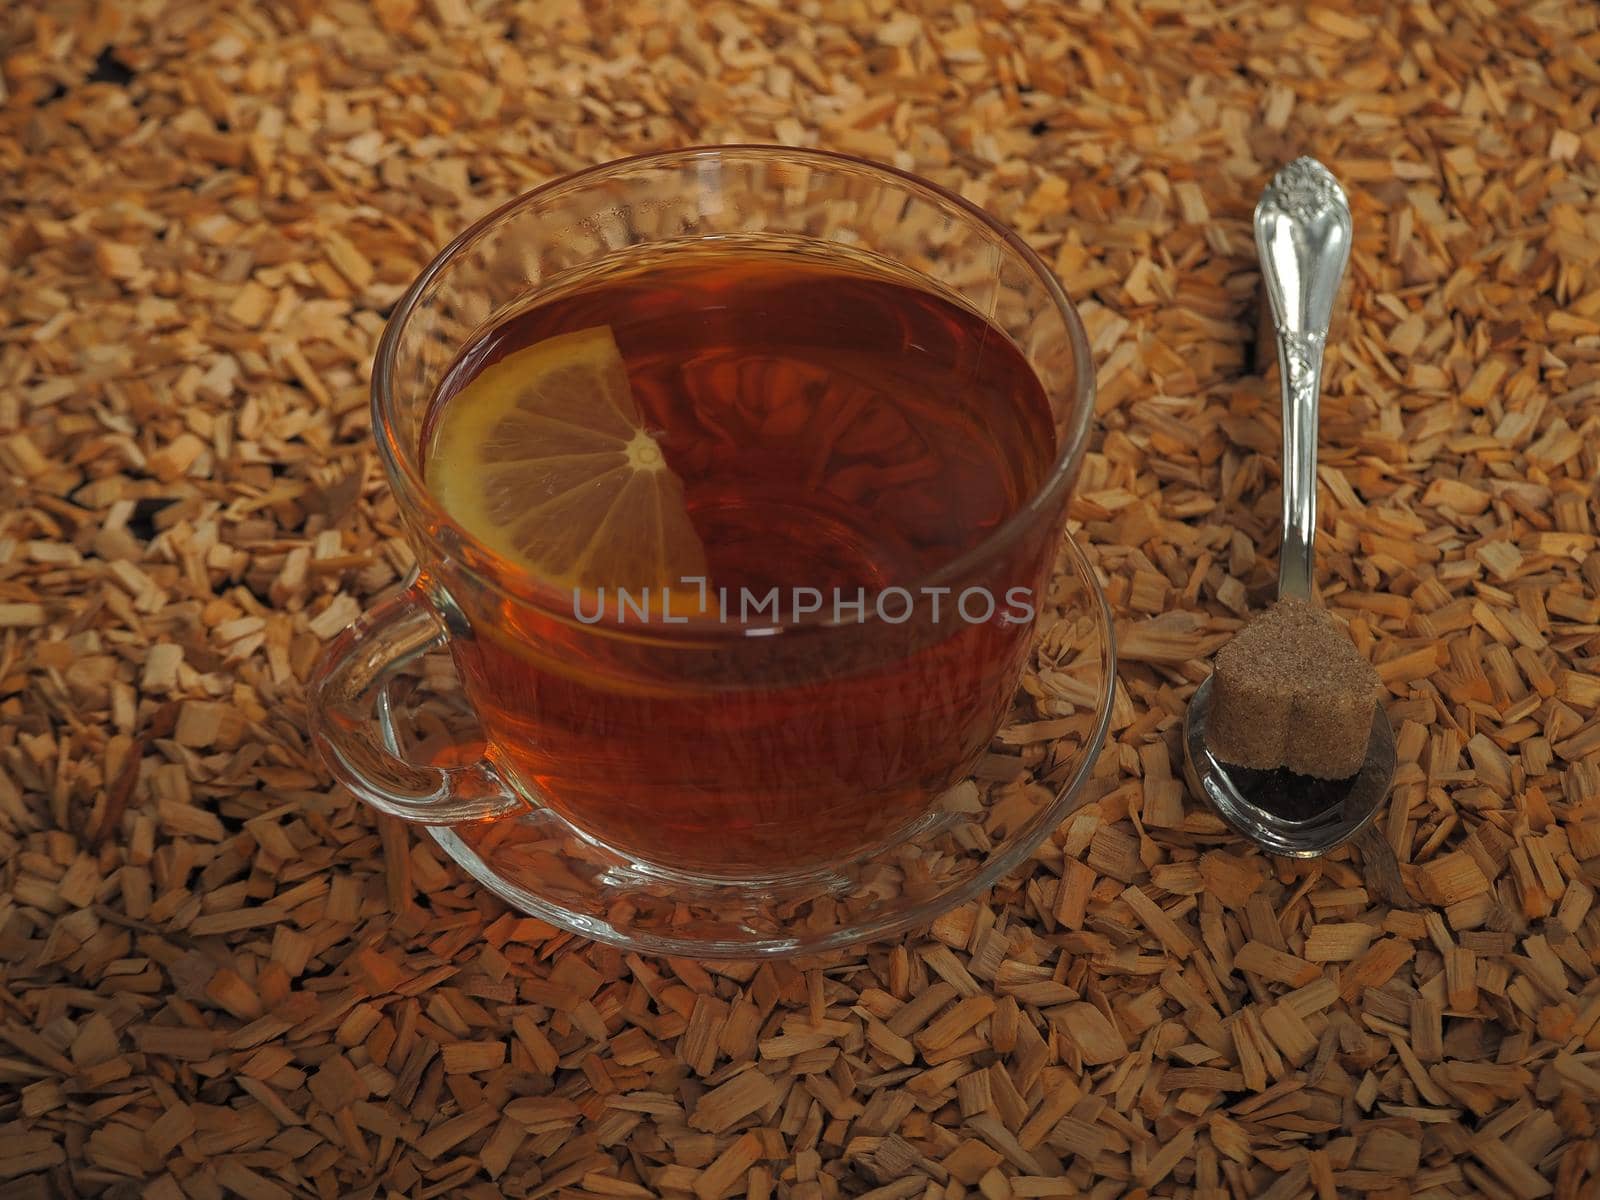 Black tea with lemon in a transparent cup on a wooden tray.